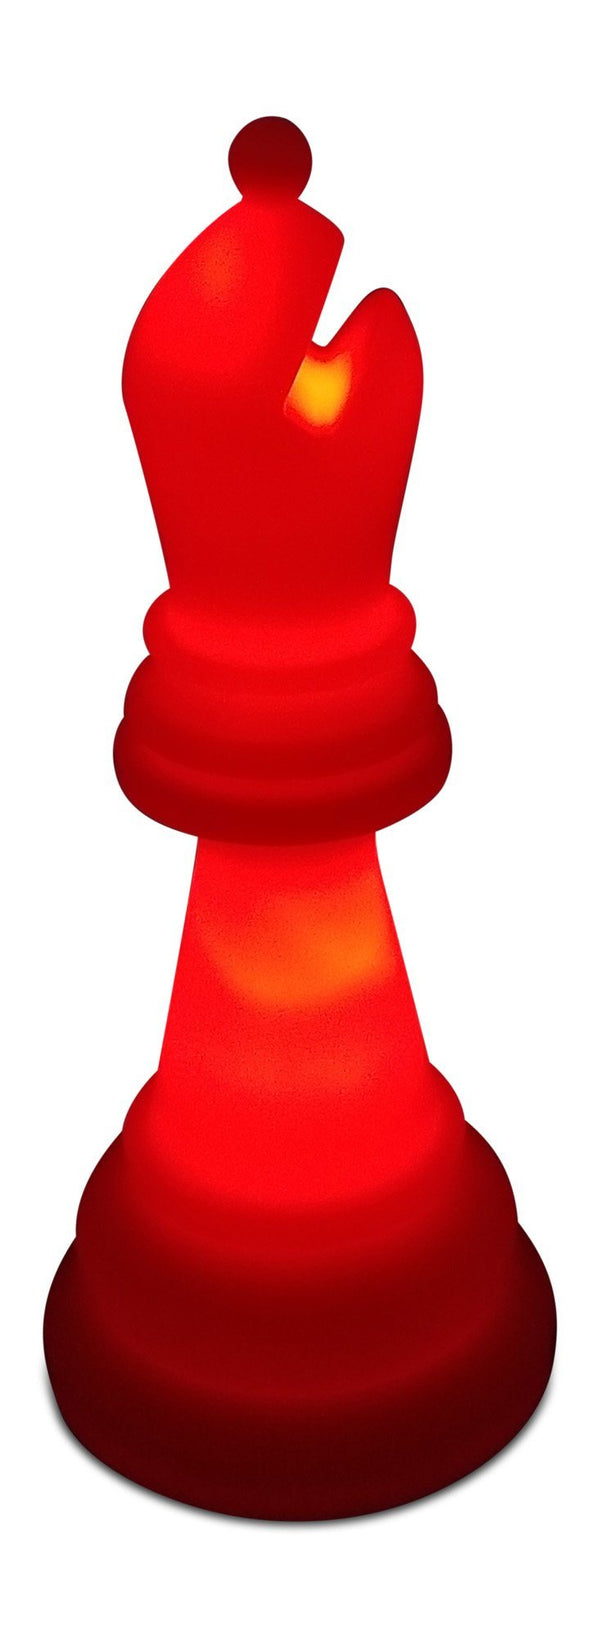 MegaChess 28 Inch Perfect Bishop Light-Up Giant Chess Piece - Red | Default Title | MegaChess.com